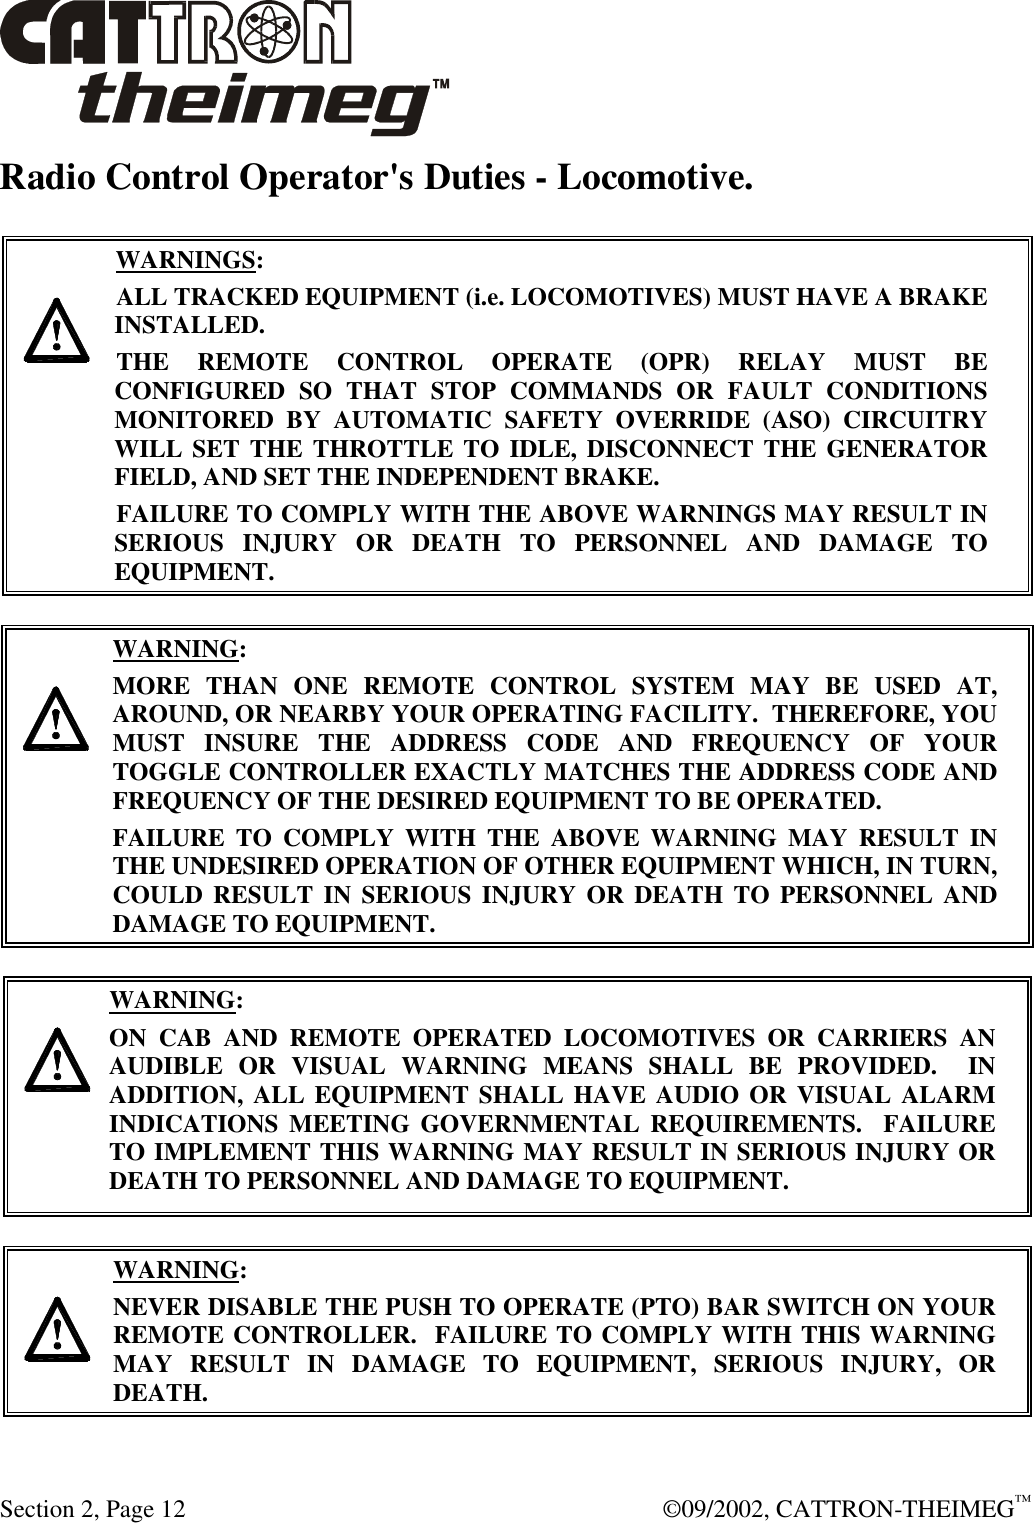  Section 2, Page 12  ©09/2002, CATTRON-THEIMEG™ Radio Control Operator&apos;s Duties - Locomotive.     WARNINGS: ALL TRACKED EQUIPMENT (i.e. LOCOMOTIVES) MUST HAVE A BRAKE INSTALLED. THE REMOTE CONTROL OPERATE (OPR) RELAY MUST BE CONFIGURED SO THAT STOP COMMANDS OR FAULT CONDITIONS MONITORED BY AUTOMATIC SAFETY OVERRIDE (ASO) CIRCUITRY WILL SET THE THROTTLE TO IDLE, DISCONNECT THE GENERATOR FIELD, AND SET THE INDEPENDENT BRAKE.  FAILURE TO COMPLY WITH THE ABOVE WARNINGS MAY RESULT IN SERIOUS INJURY OR DEATH TO PERSONNEL AND DAMAGE TO EQUIPMENT.        WARNING: MORE THAN ONE REMOTE CONTROL SYSTEM MAY BE USED AT, AROUND, OR NEARBY YOUR OPERATING FACILITY.  THEREFORE, YOU MUST INSURE THE ADDRESS CODE AND FREQUENCY OF YOUR TOGGLE CONTROLLER EXACTLY MATCHES THE ADDRESS CODE AND FREQUENCY OF THE DESIRED EQUIPMENT TO BE OPERATED. FAILURE TO COMPLY WITH THE ABOVE WARNING MAY RESULT IN THE UNDESIRED OPERATION OF OTHER EQUIPMENT WHICH, IN TURN, COULD RESULT IN SERIOUS INJURY OR DEATH TO PERSONNEL AND DAMAGE TO EQUIPMENT.       WARNING: ON CAB AND REMOTE OPERATED LOCOMOTIVES OR CARRIERS AN AUDIBLE OR VISUAL WARNING MEANS SHALL BE PROVIDED.  IN ADDITION, ALL EQUIPMENT SHALL HAVE AUDIO OR VISUAL ALARM INDICATIONS MEETING GOVERNMENTAL REQUIREMENTS.  FAILURE TO IMPLEMENT THIS WARNING MAY RESULT IN SERIOUS INJURY OR DEATH TO PERSONNEL AND DAMAGE TO EQUIPMENT.    WARNING: NEVER DISABLE THE PUSH TO OPERATE (PTO) BAR SWITCH ON YOUR REMOTE CONTROLLER.  FAILURE TO COMPLY WITH THIS WARNING MAY RESULT IN DAMAGE TO EQUIPMENT, SERIOUS INJURY, OR DEATH.    